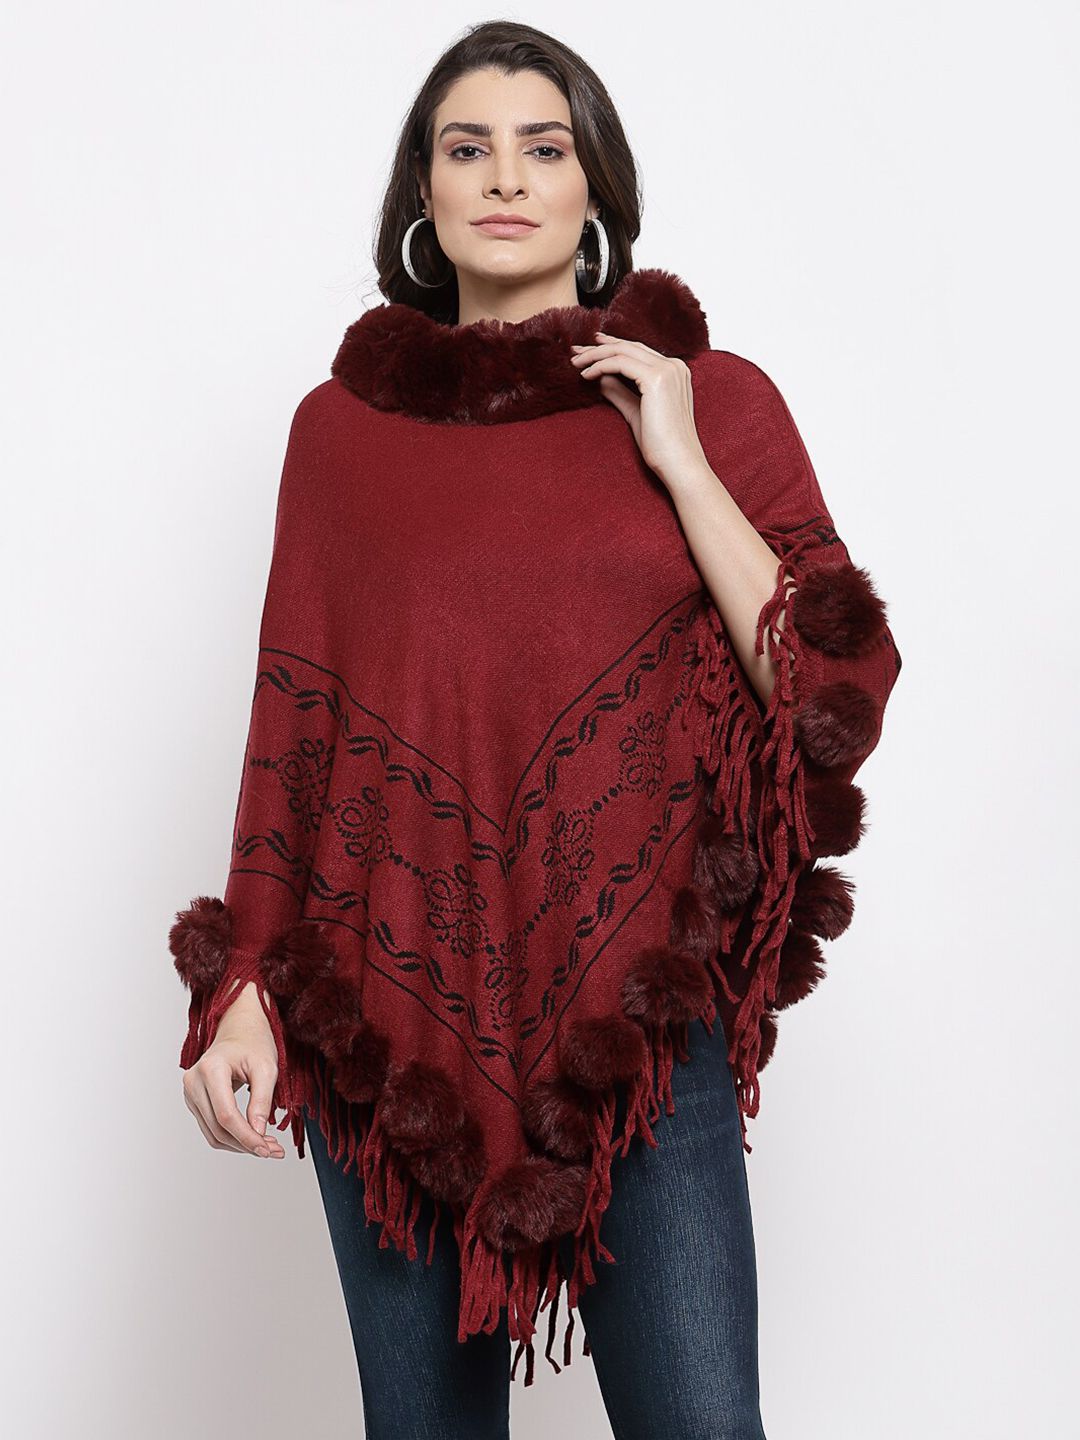 Mafadeny Women Maroon & Black Printed Asymmetric Poncho with Fringed Detail Price in India